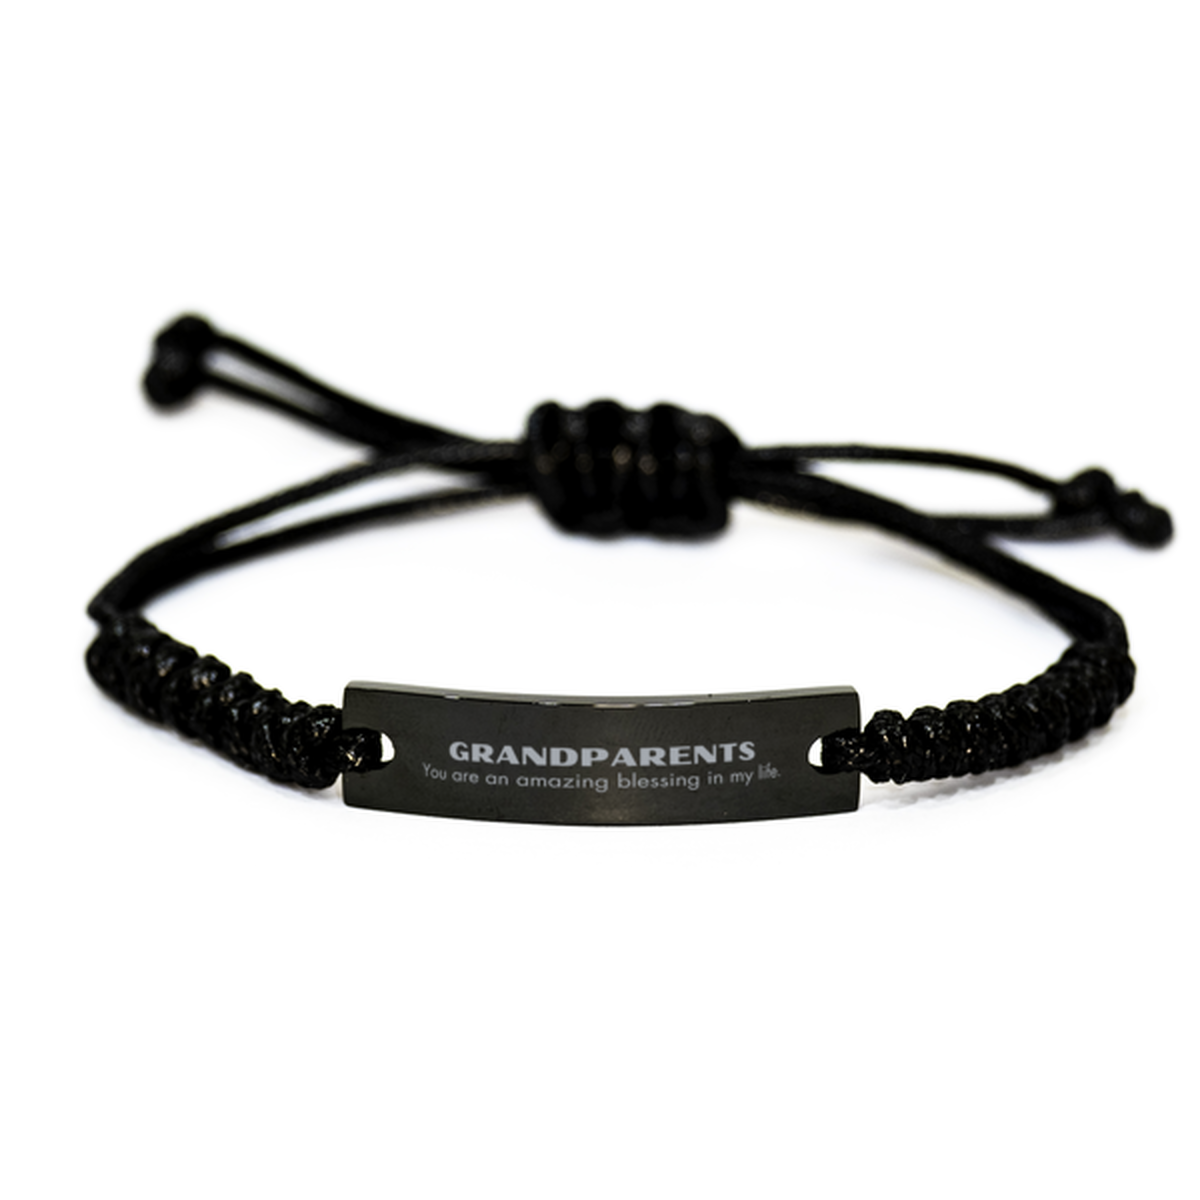 Grandparents Black Rope Bracelet, You are an amazing blessing in my life, Thank You Gifts For Grandparents, Inspirational Birthday Christmas Unique Gifts For Grandparents